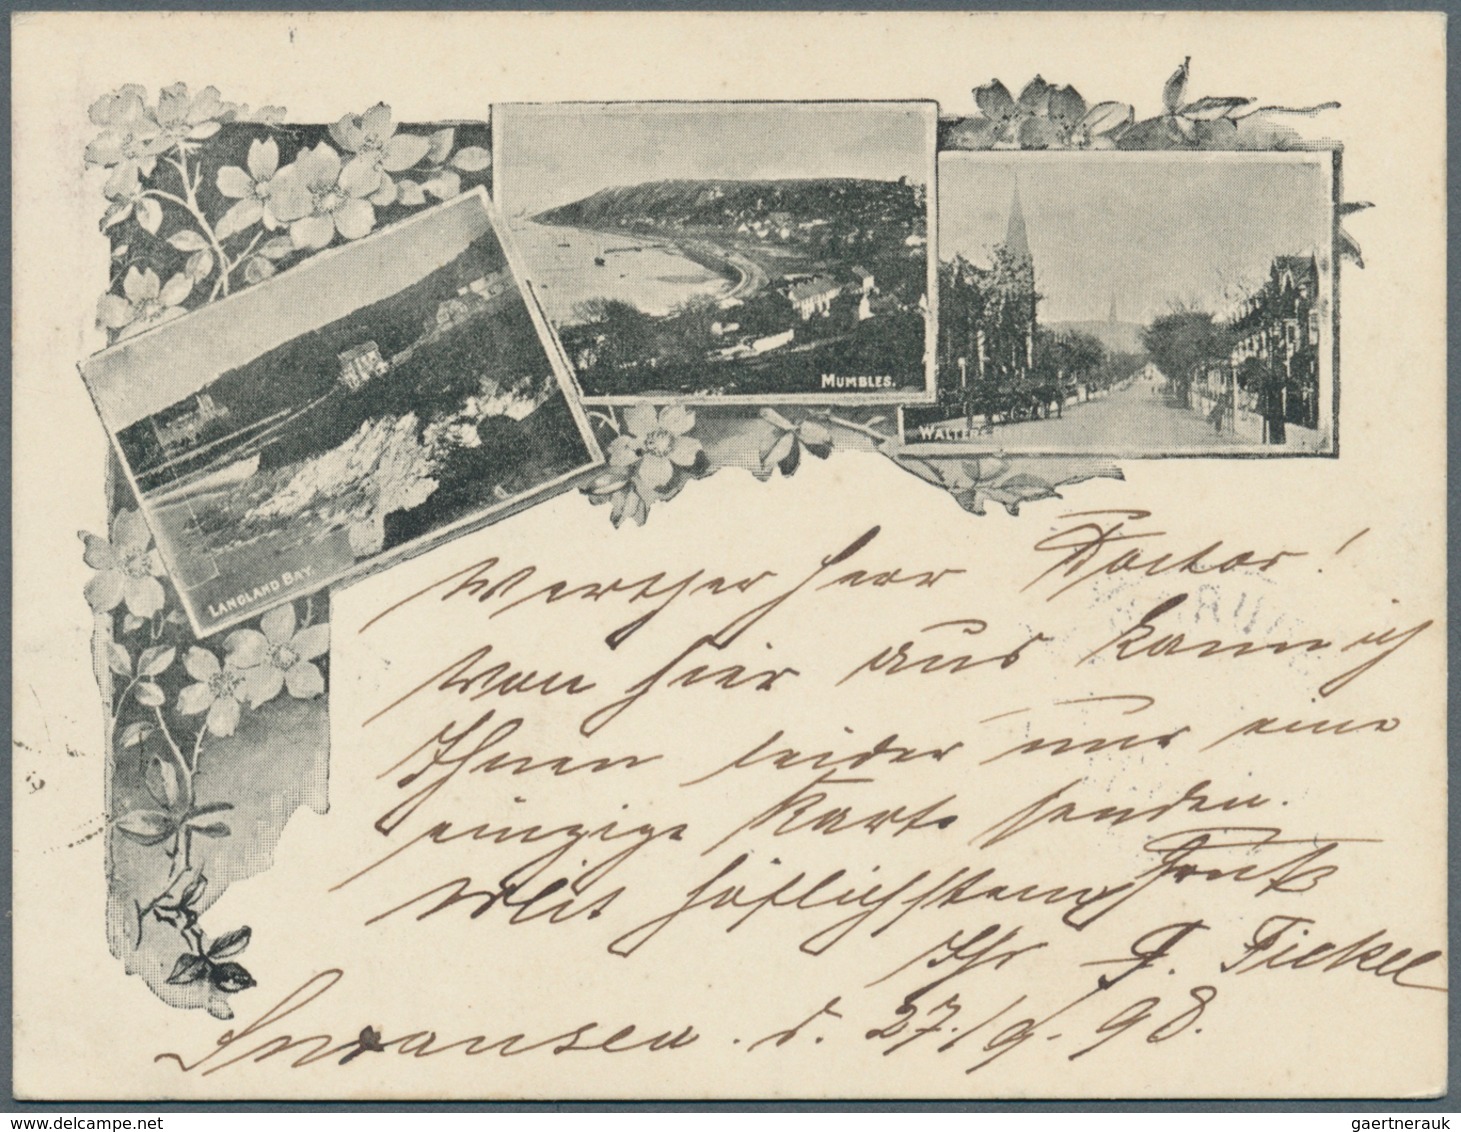 26707 Großbritannien: 1898/1955, 96 early picture postcards, many from 1898 in co called "small size" with